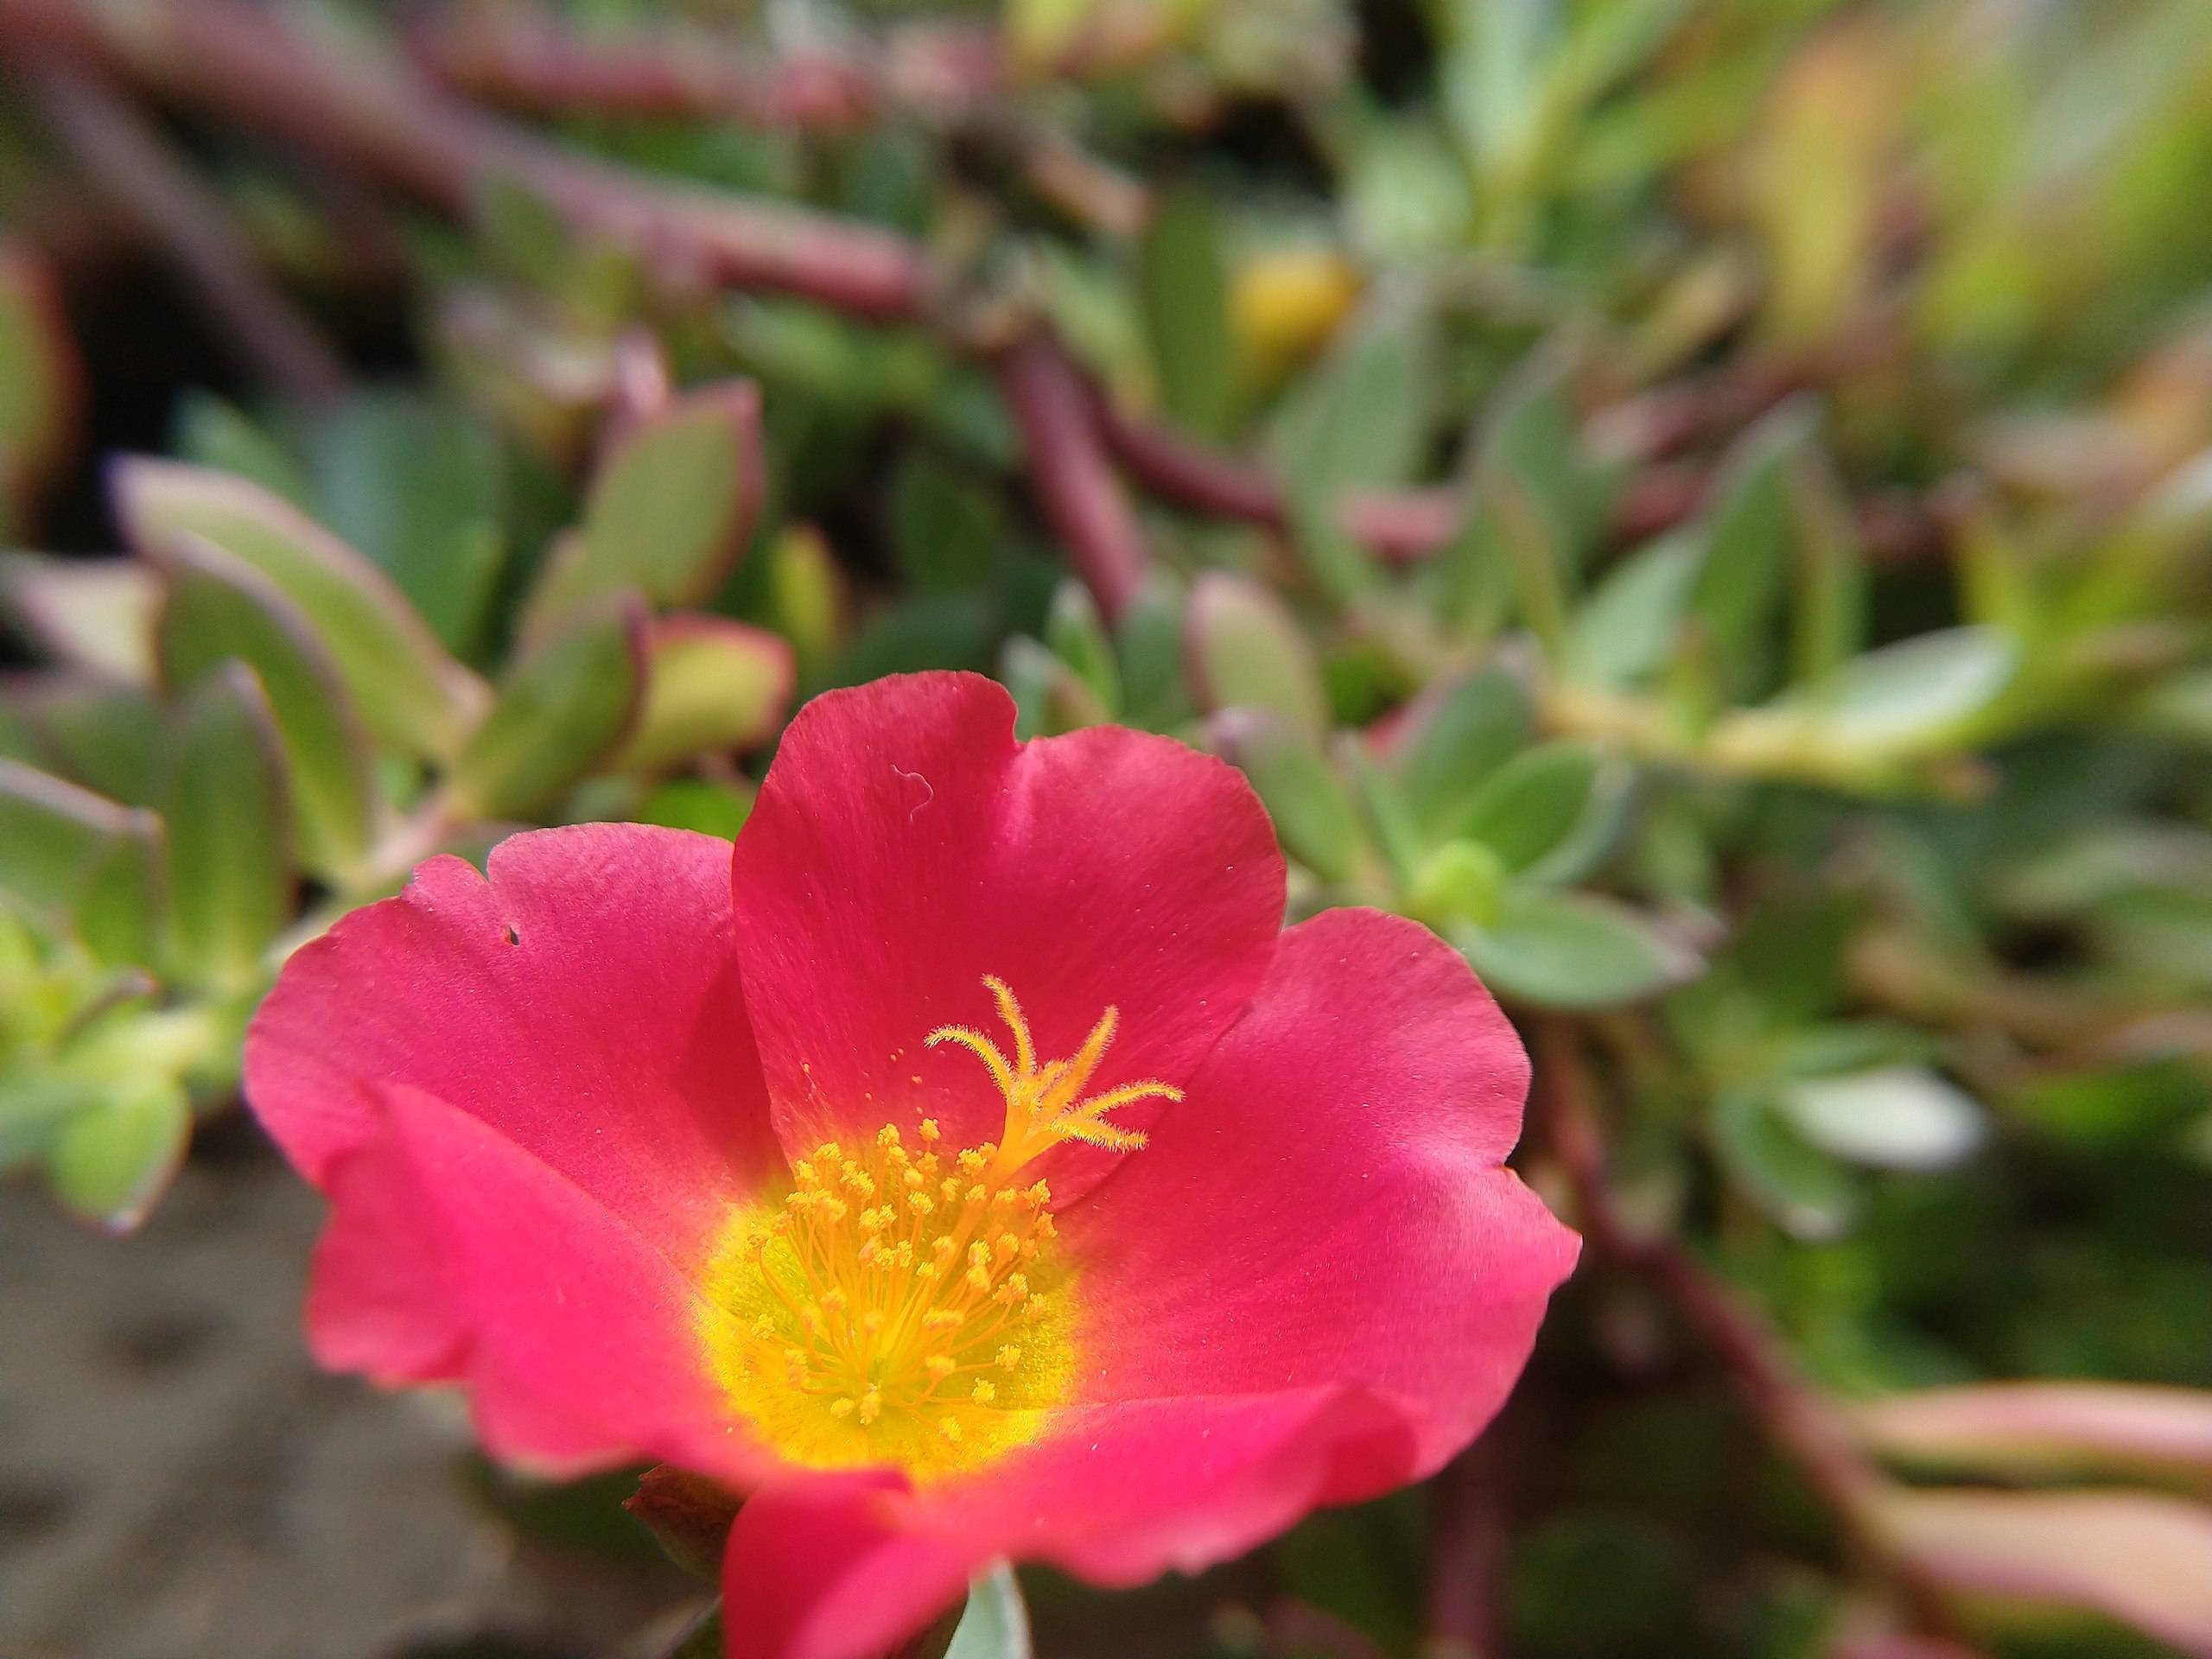 red flower with yellow center, stamens, pink-green leaves and dark-pink stems